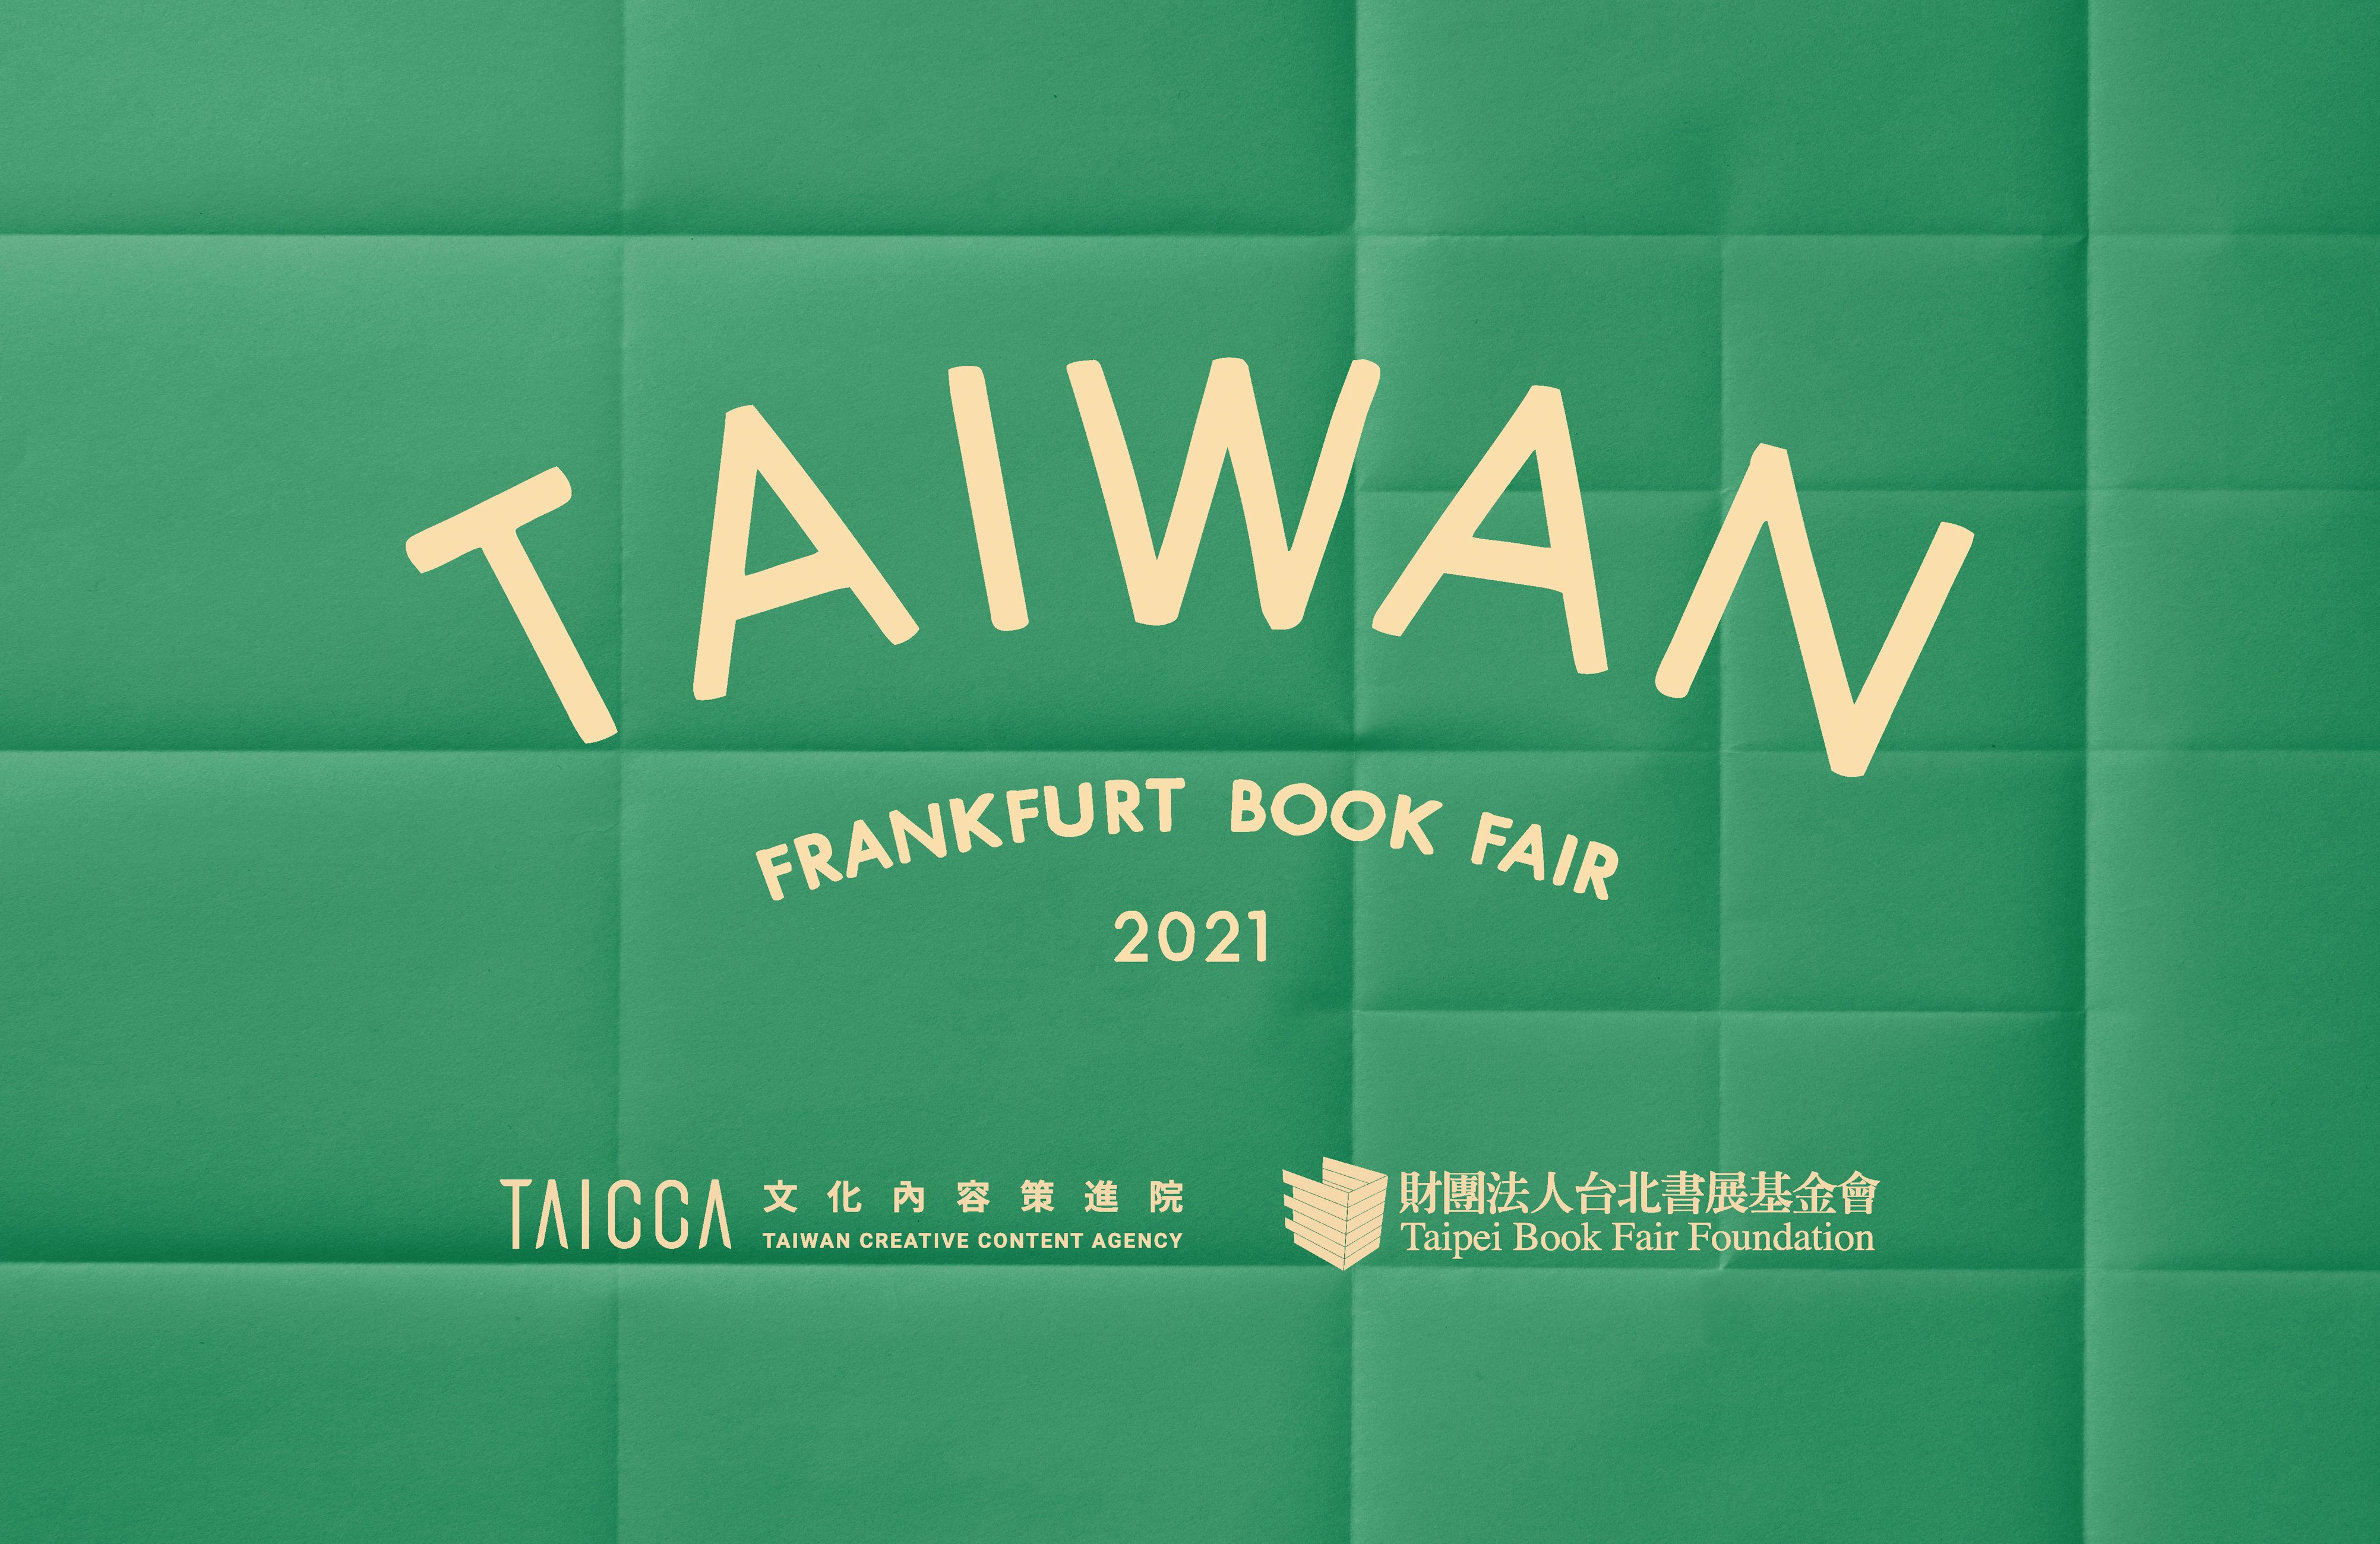 TAICCA Opens Taiwan Pavilion at Frankfurt Book Fair and Introduces Publishing Works Through the Scents of Taiwan